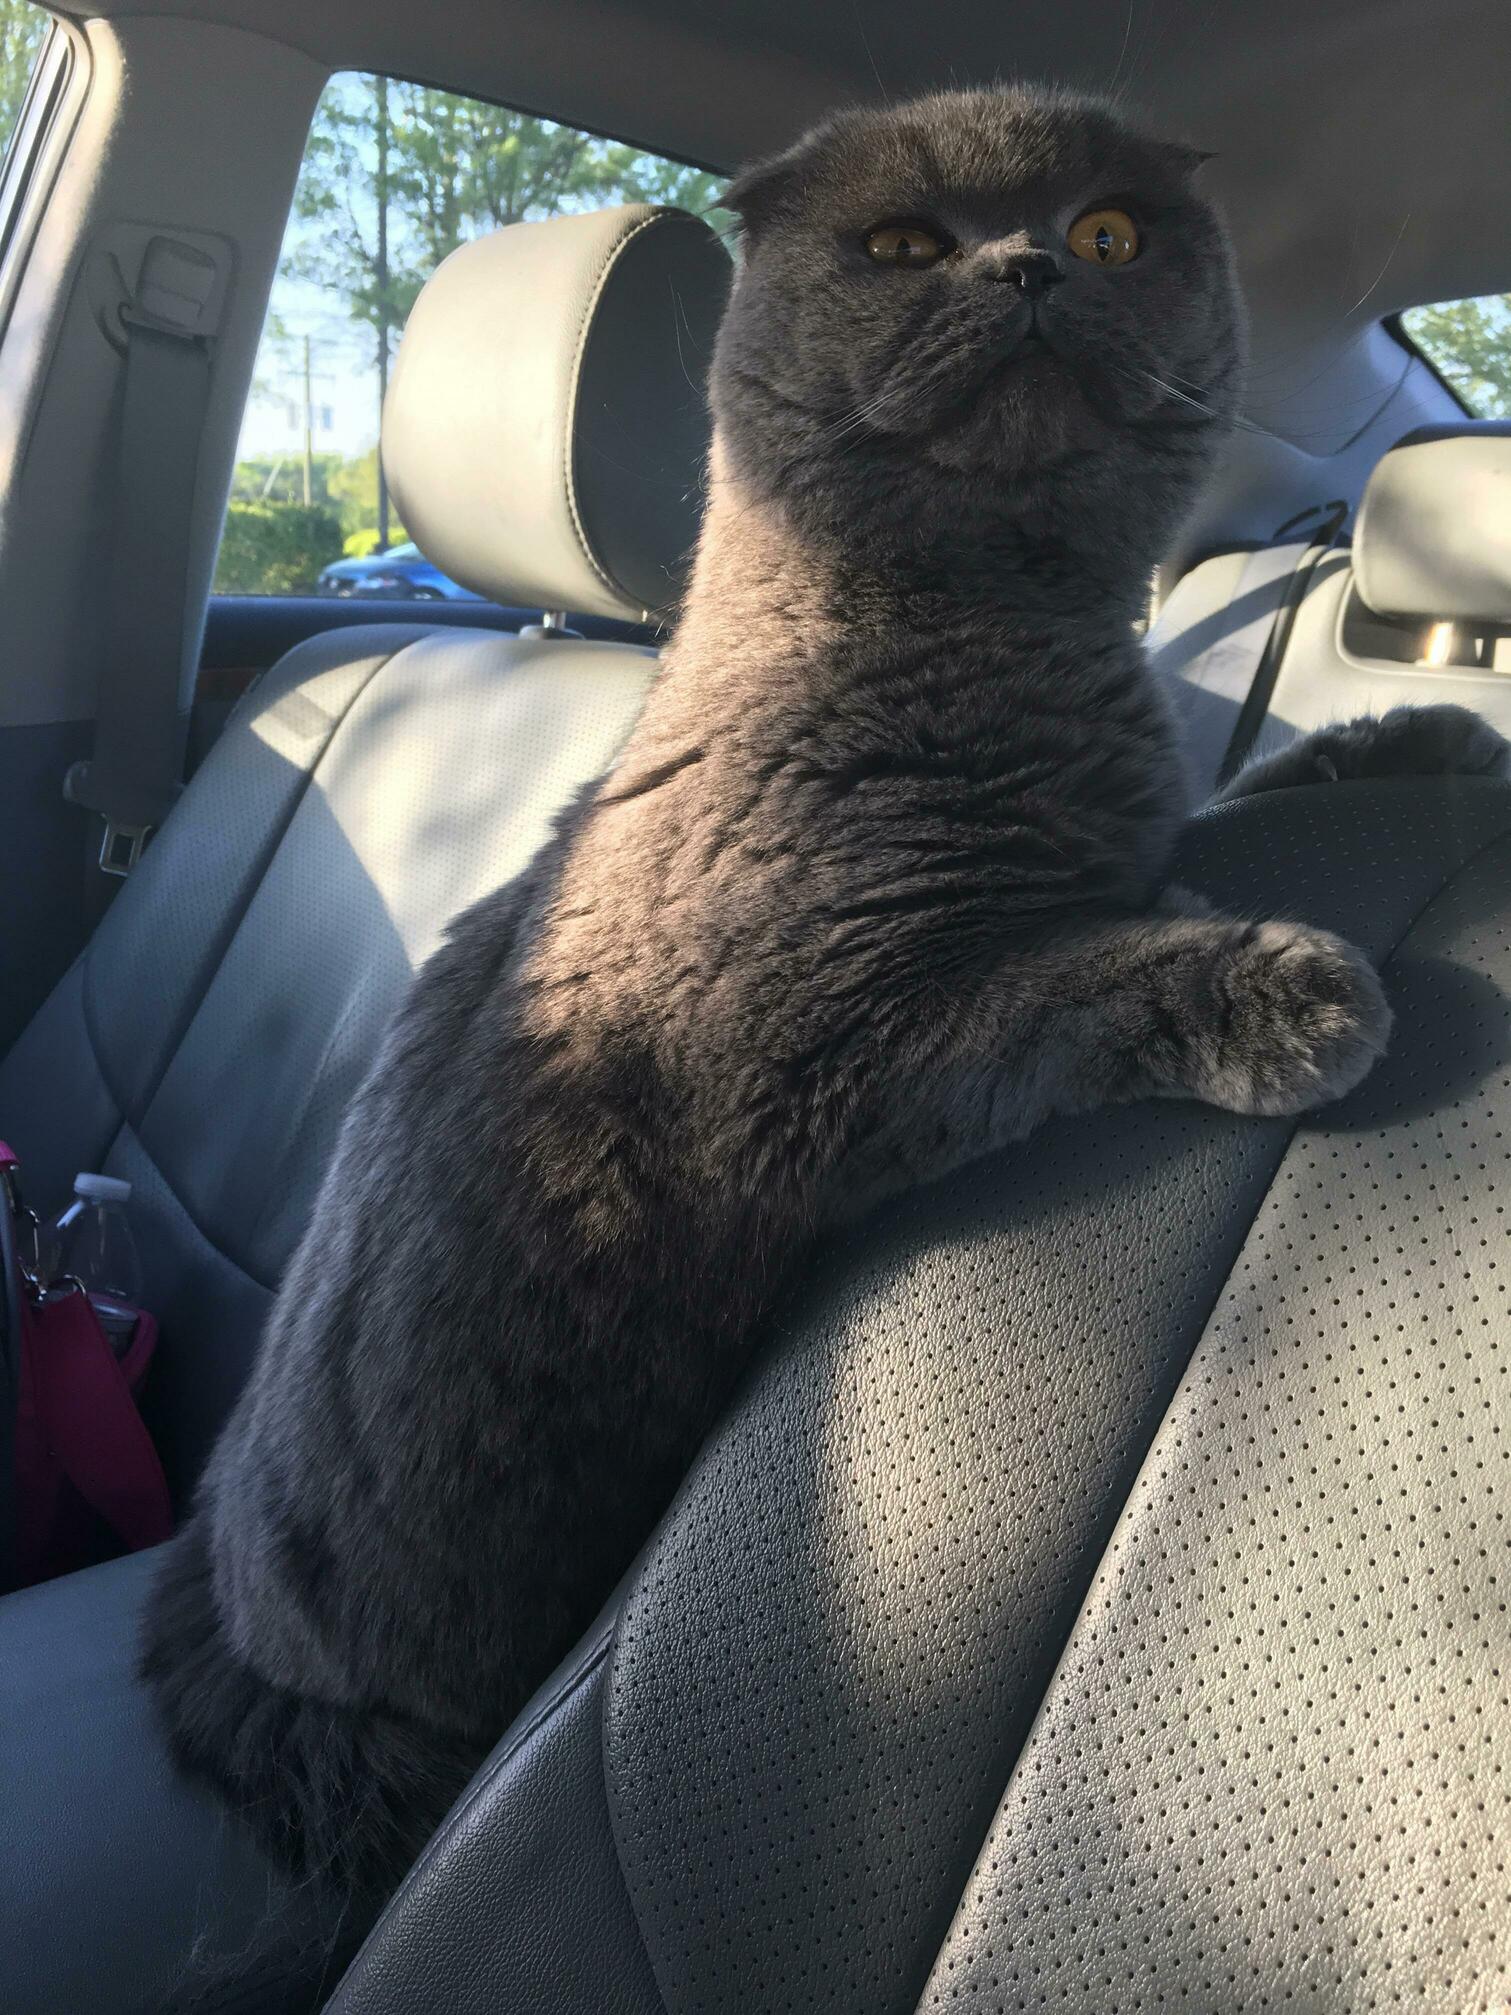 My cat loves to ride in the car. she is the best co pilot because she gives disapproving glares to other drivers so i can focus on the road.